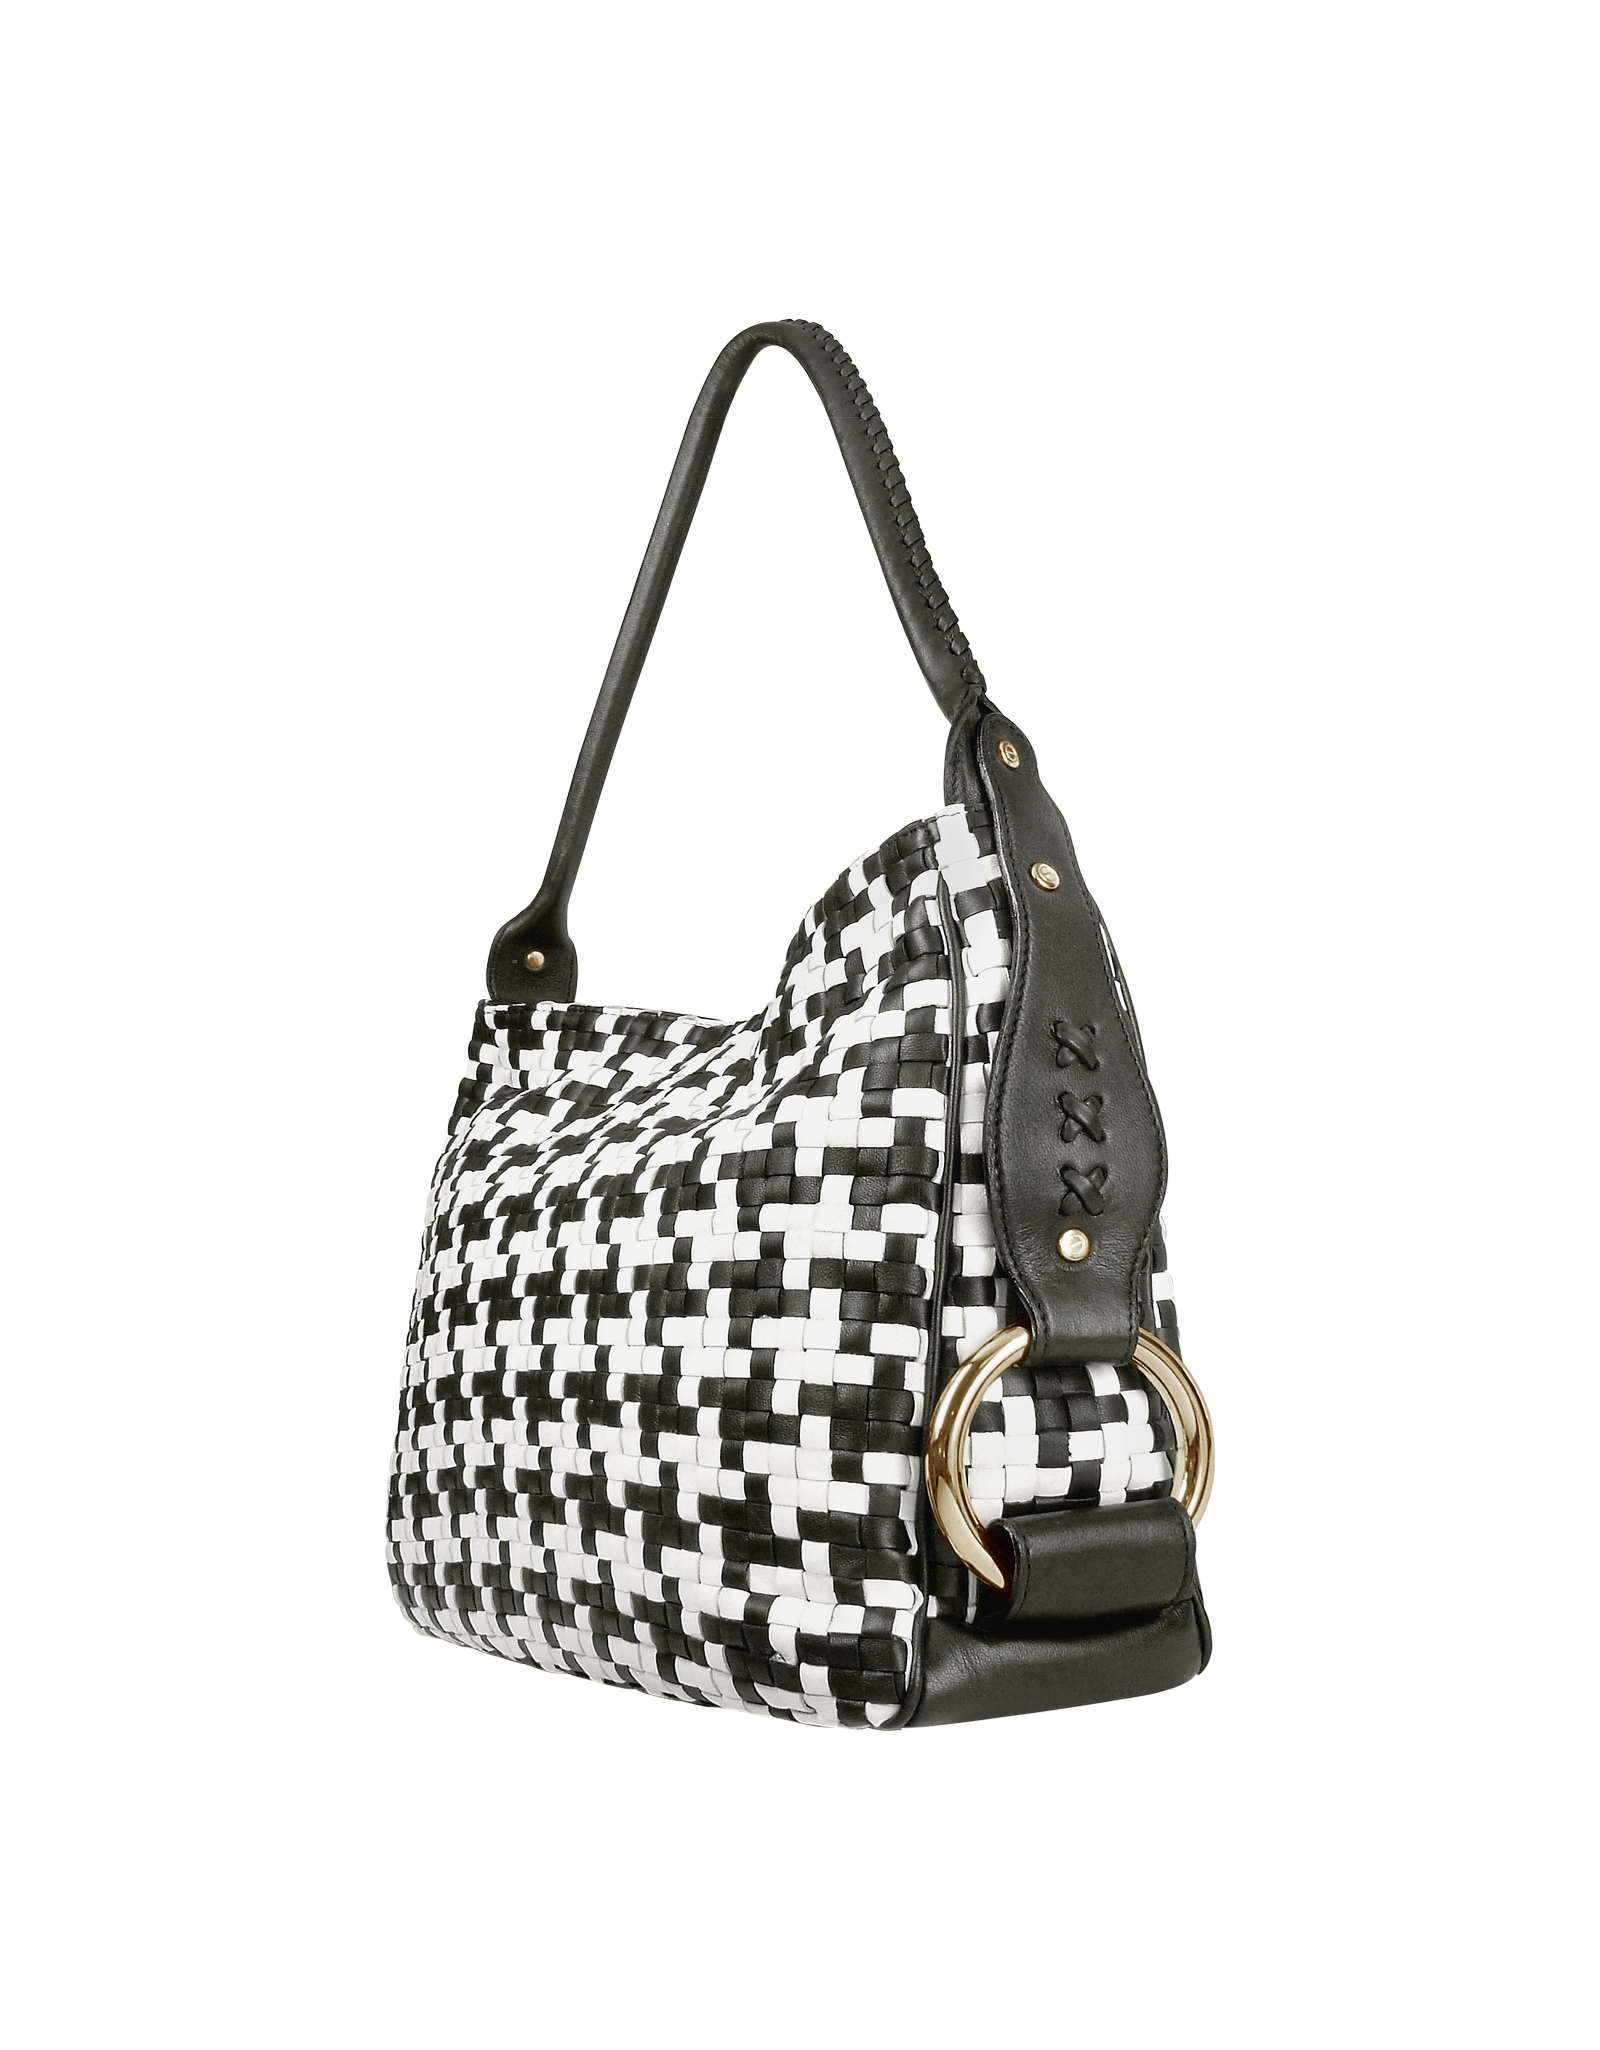 Fontanelli Black and White Houndstooth Woven Leather Tote Bag - Lyst